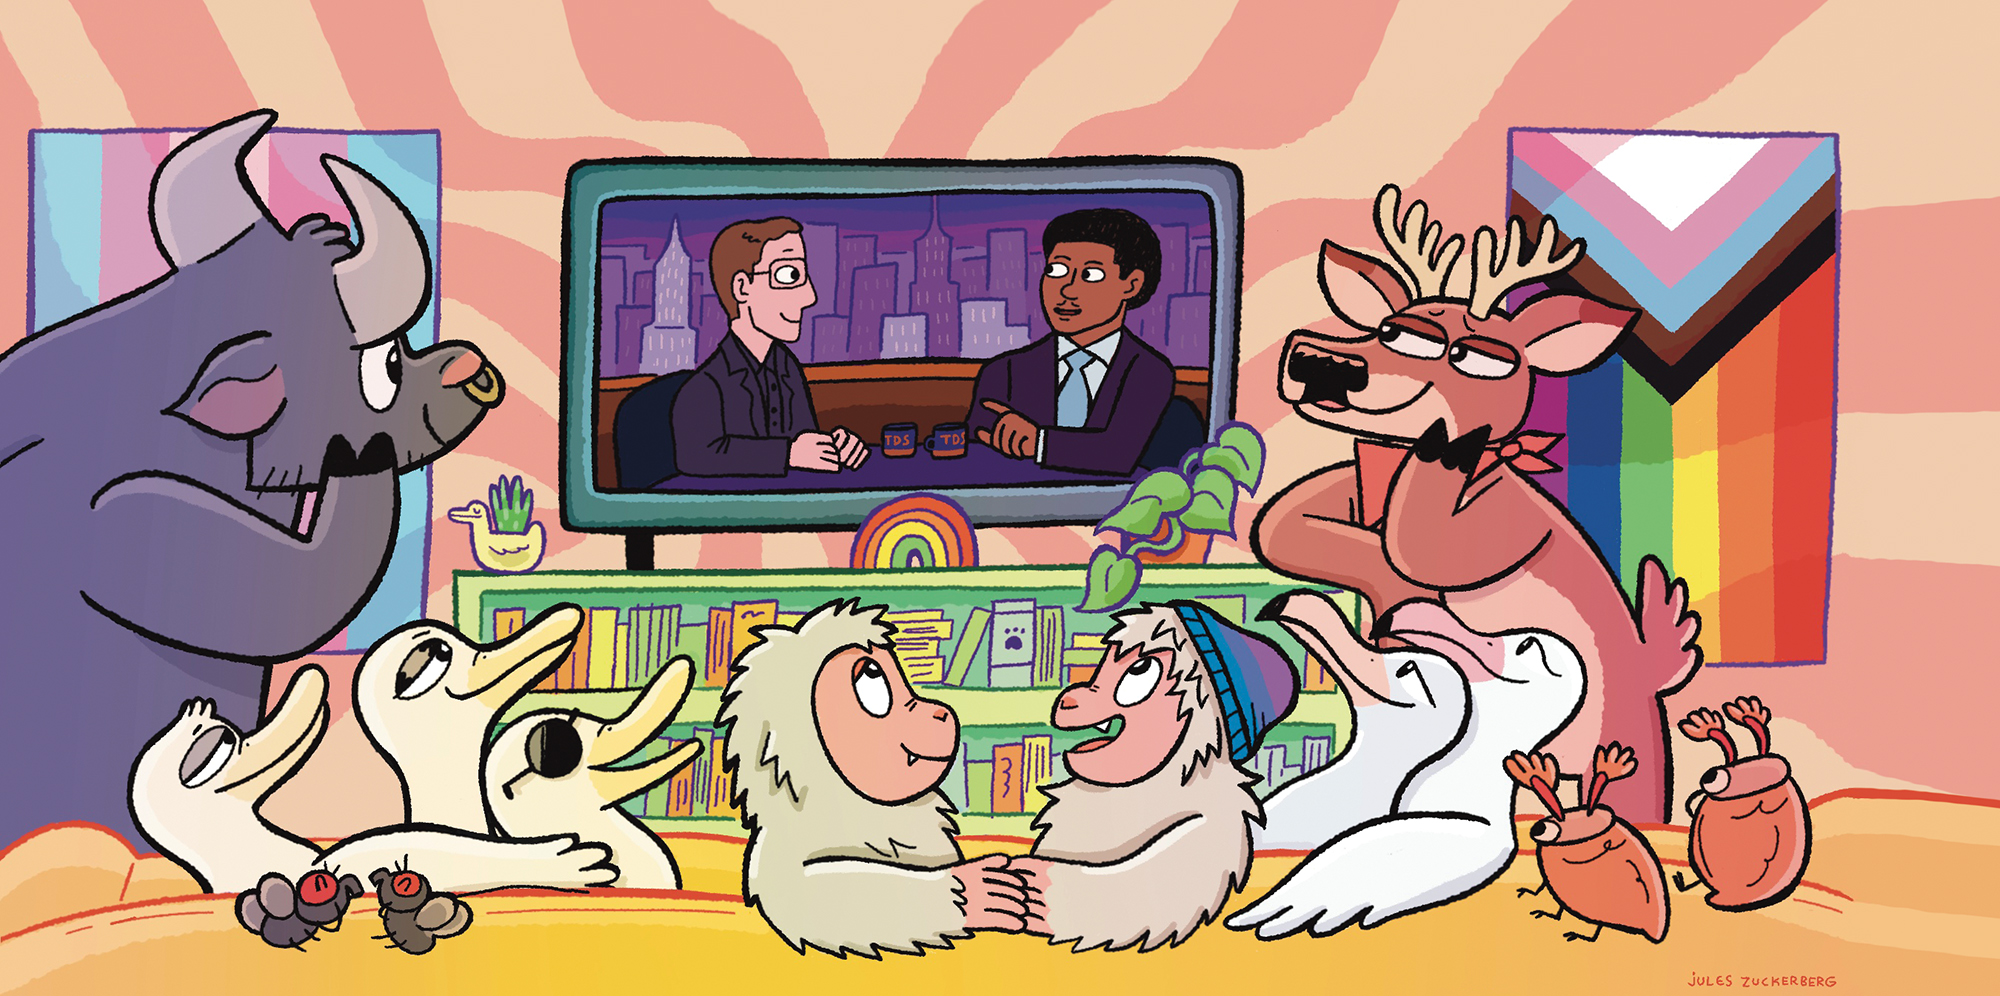 A cartoon-style illustration shows queer animals gather around the TV to watch two men speak on The Daily Show.